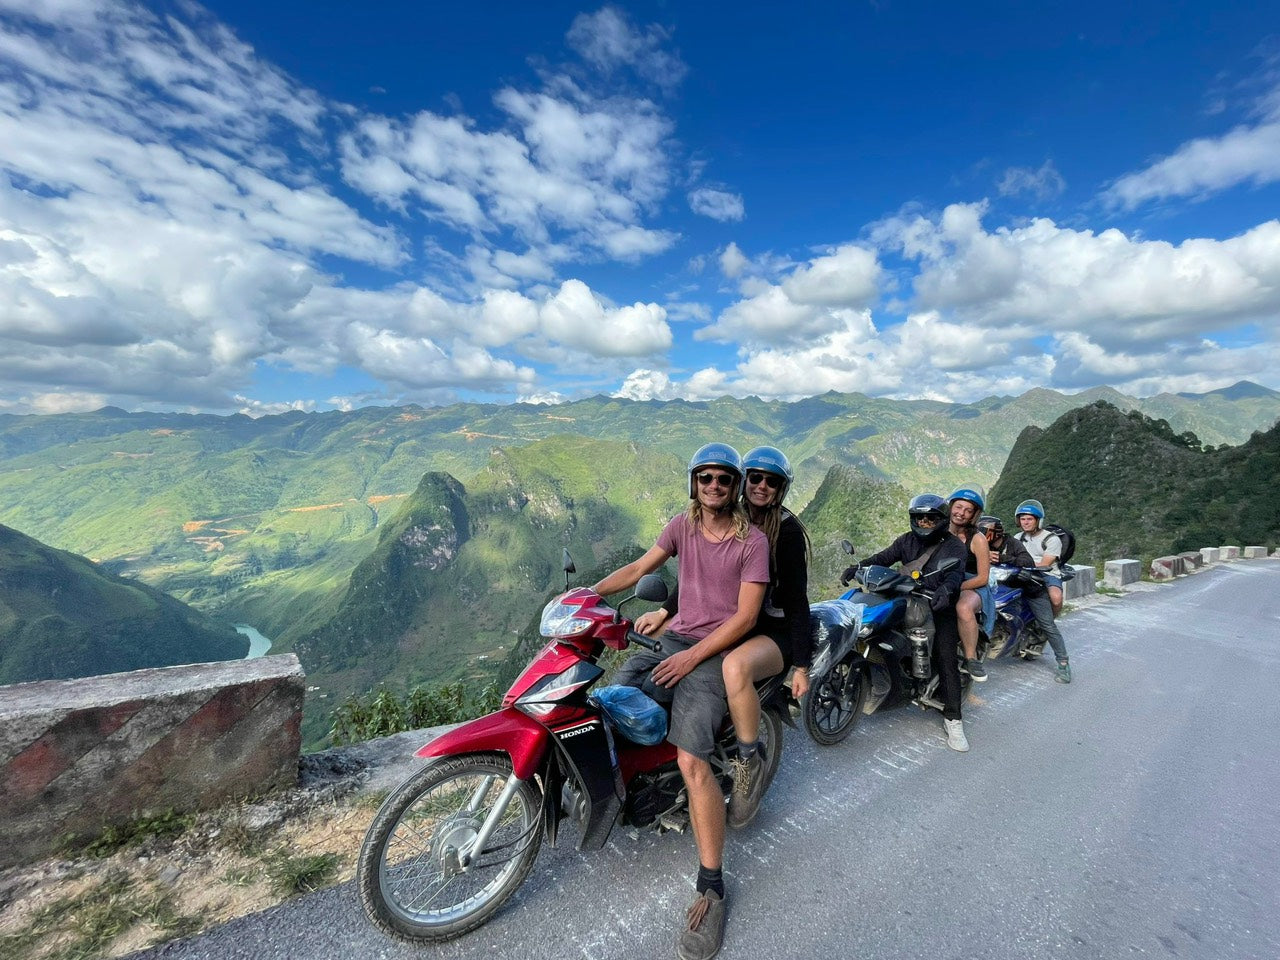 HGD2 : Ha Giang Loop, 4 JOURS 3 Nuits (Ride Pillion With A Friend)